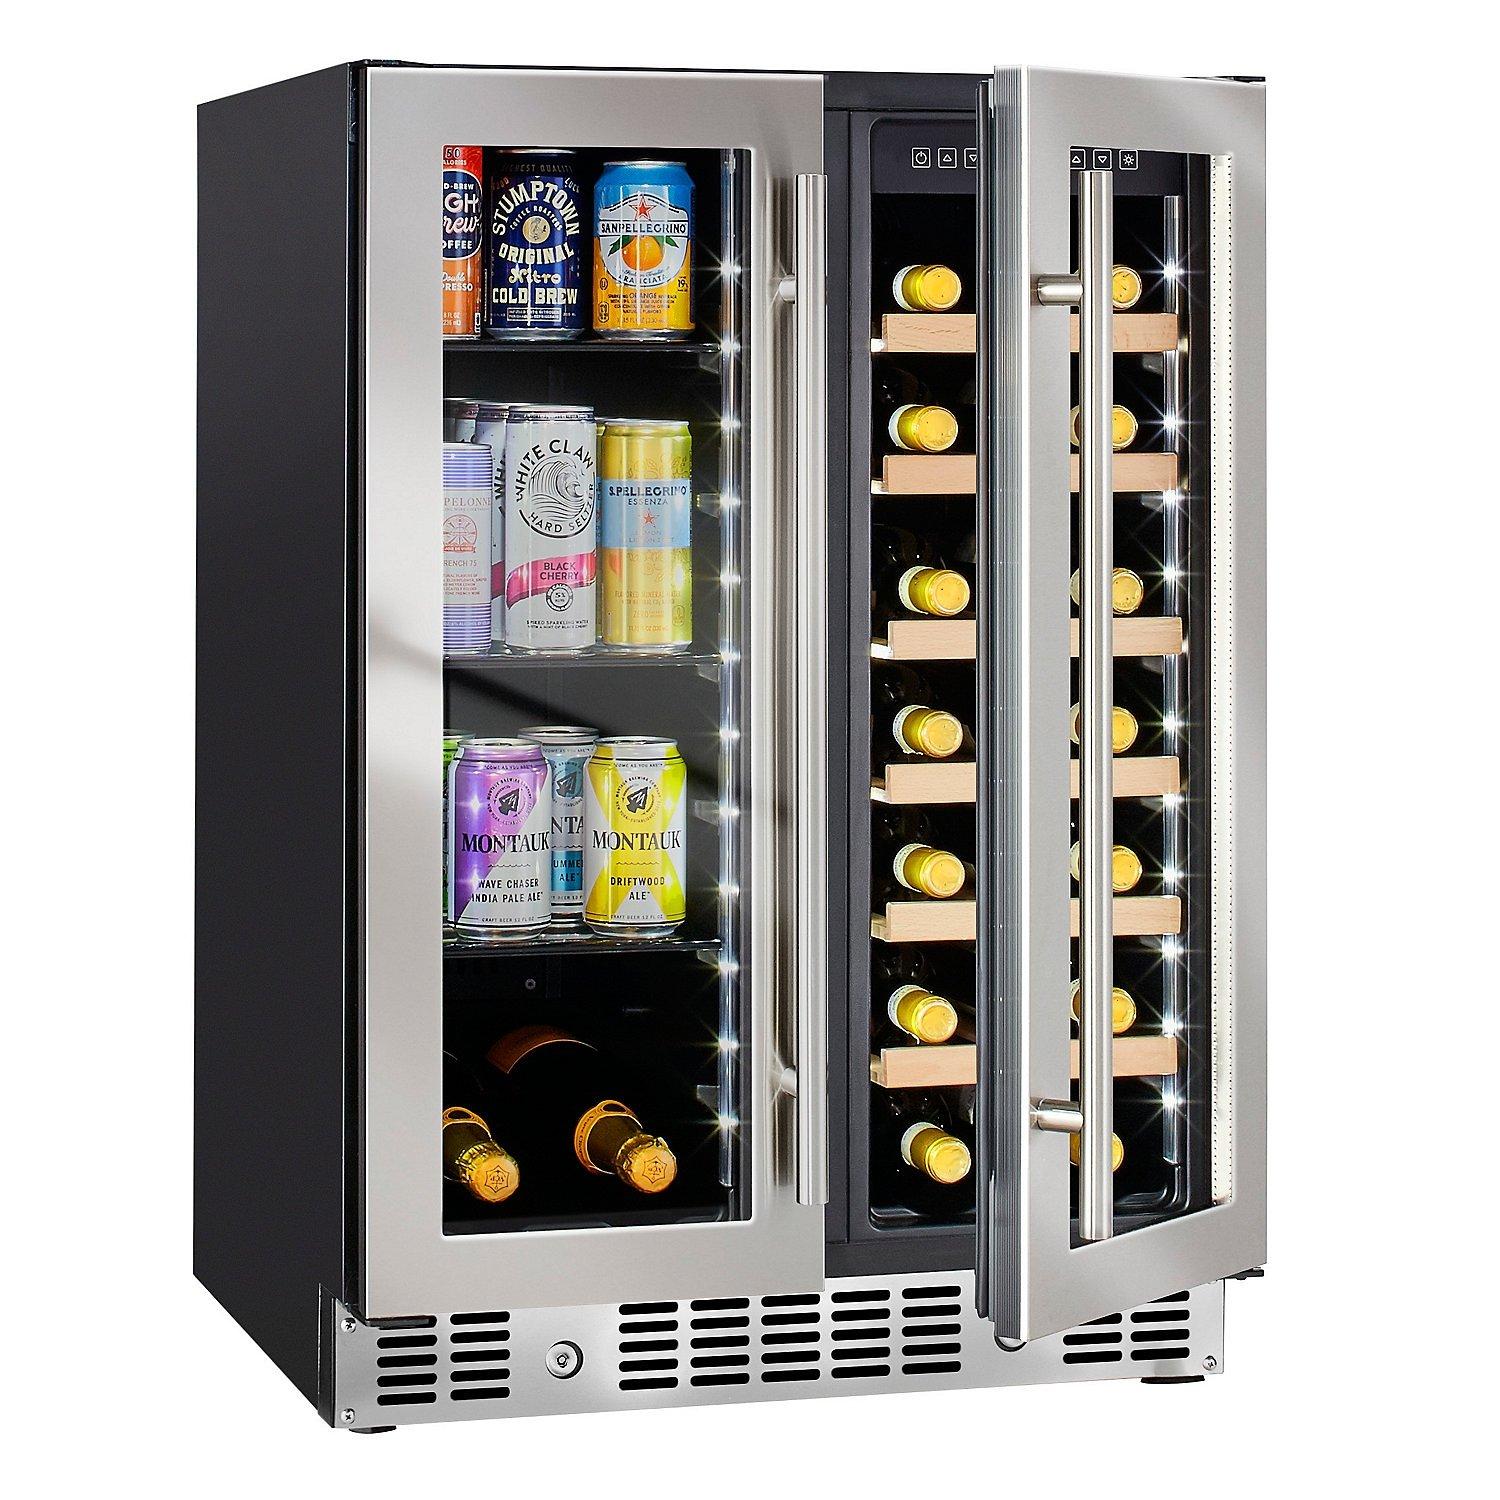 N Finity Pro Hdx 24 Wine And Beverage Center Wine Enthusiast